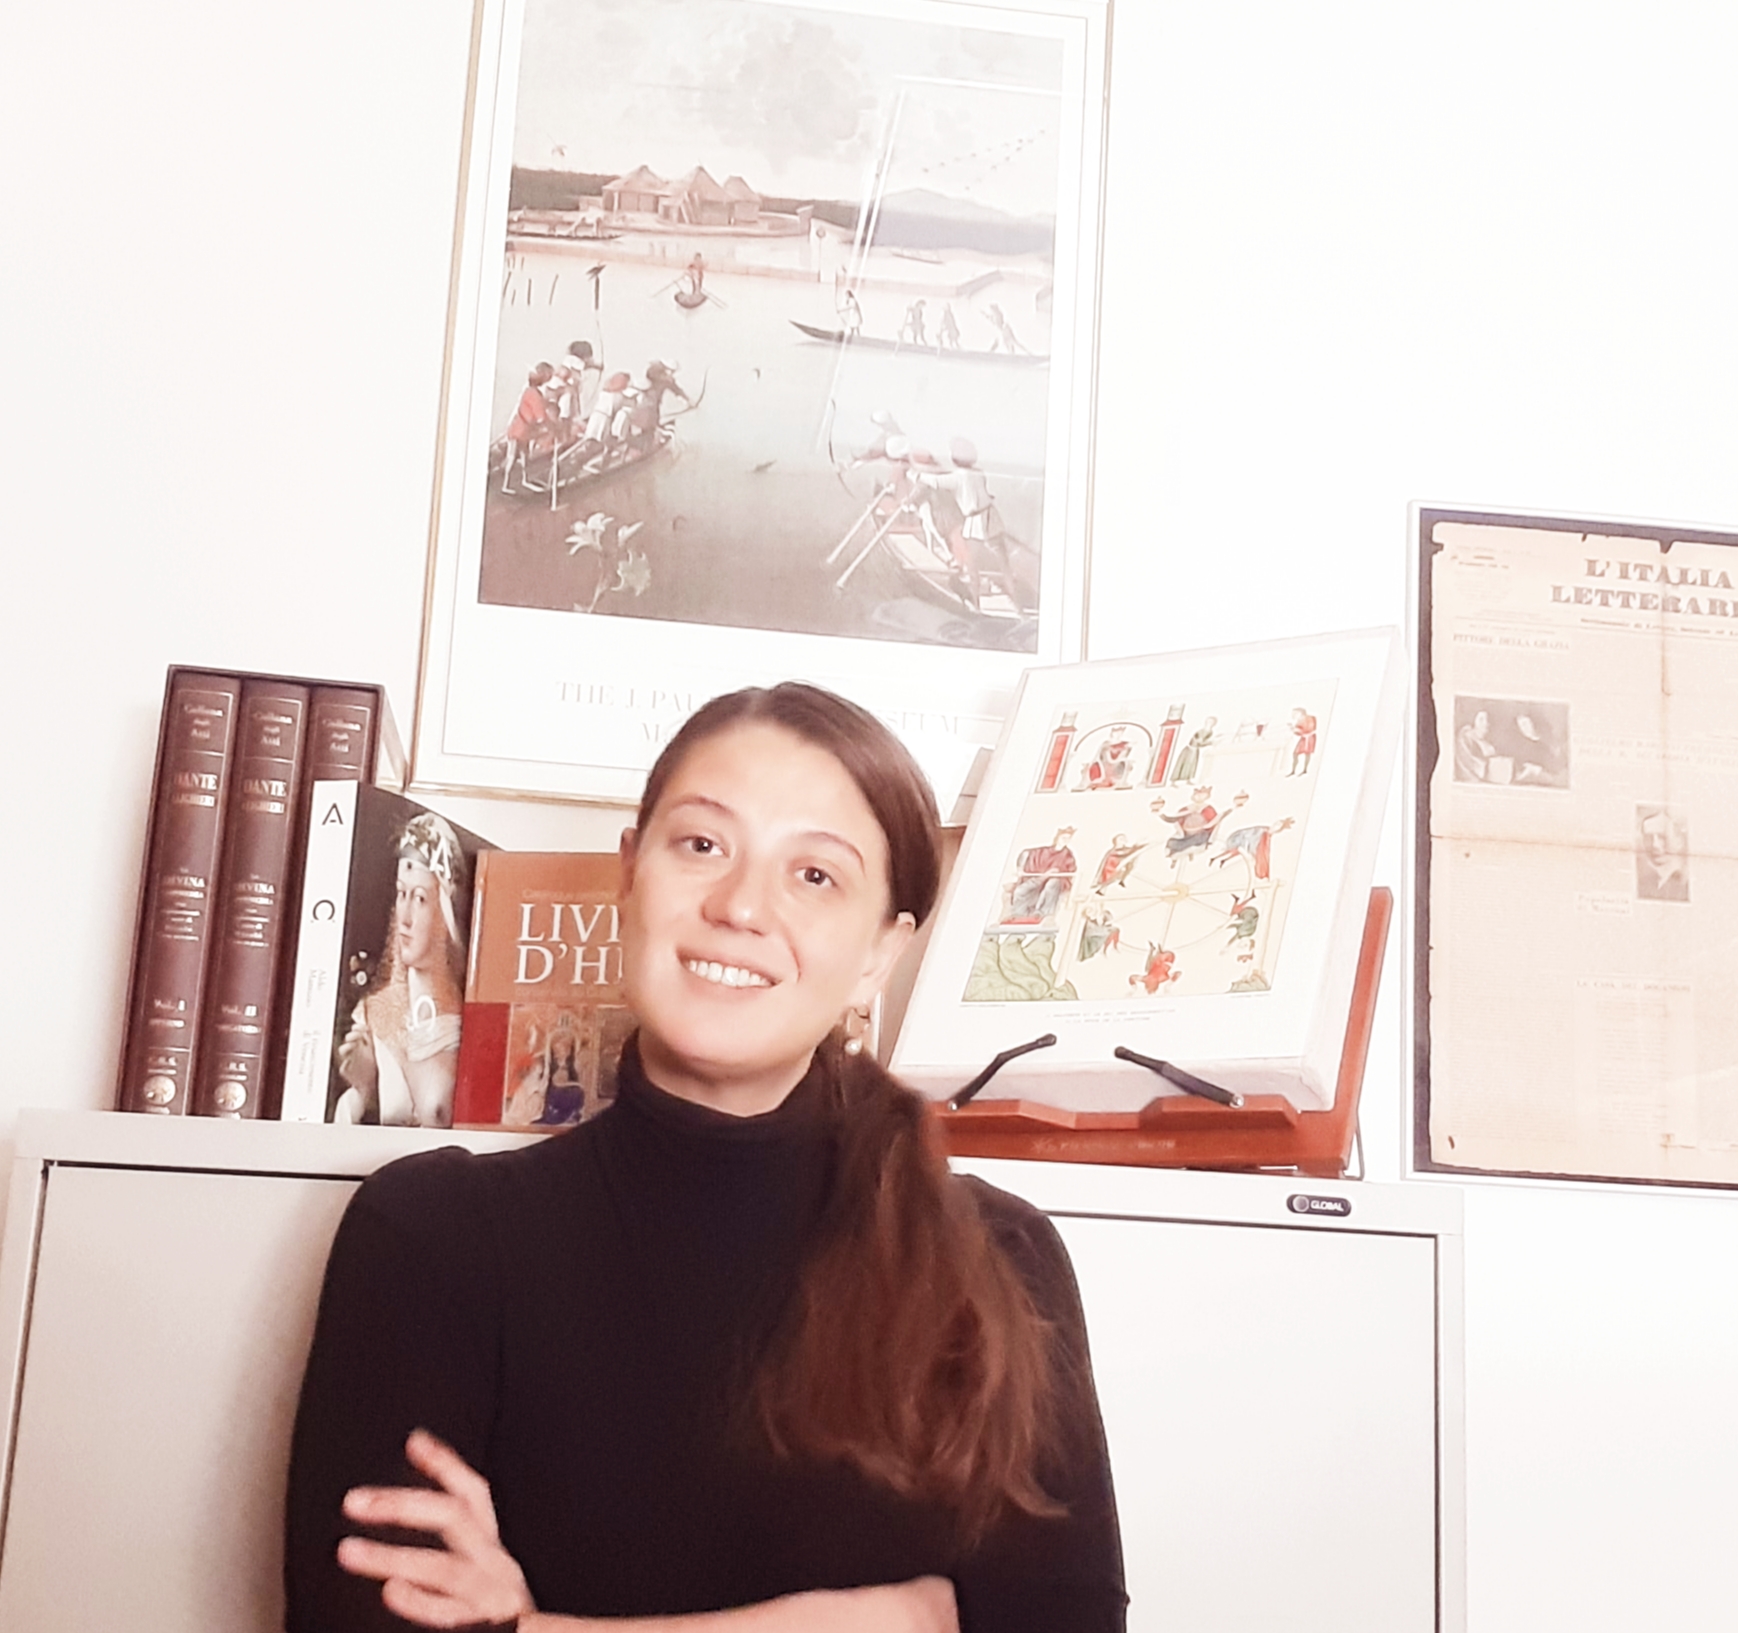 colour headshot photo of Elisa Brilli against beige filing cabinet with books and illustrated wall hangings.